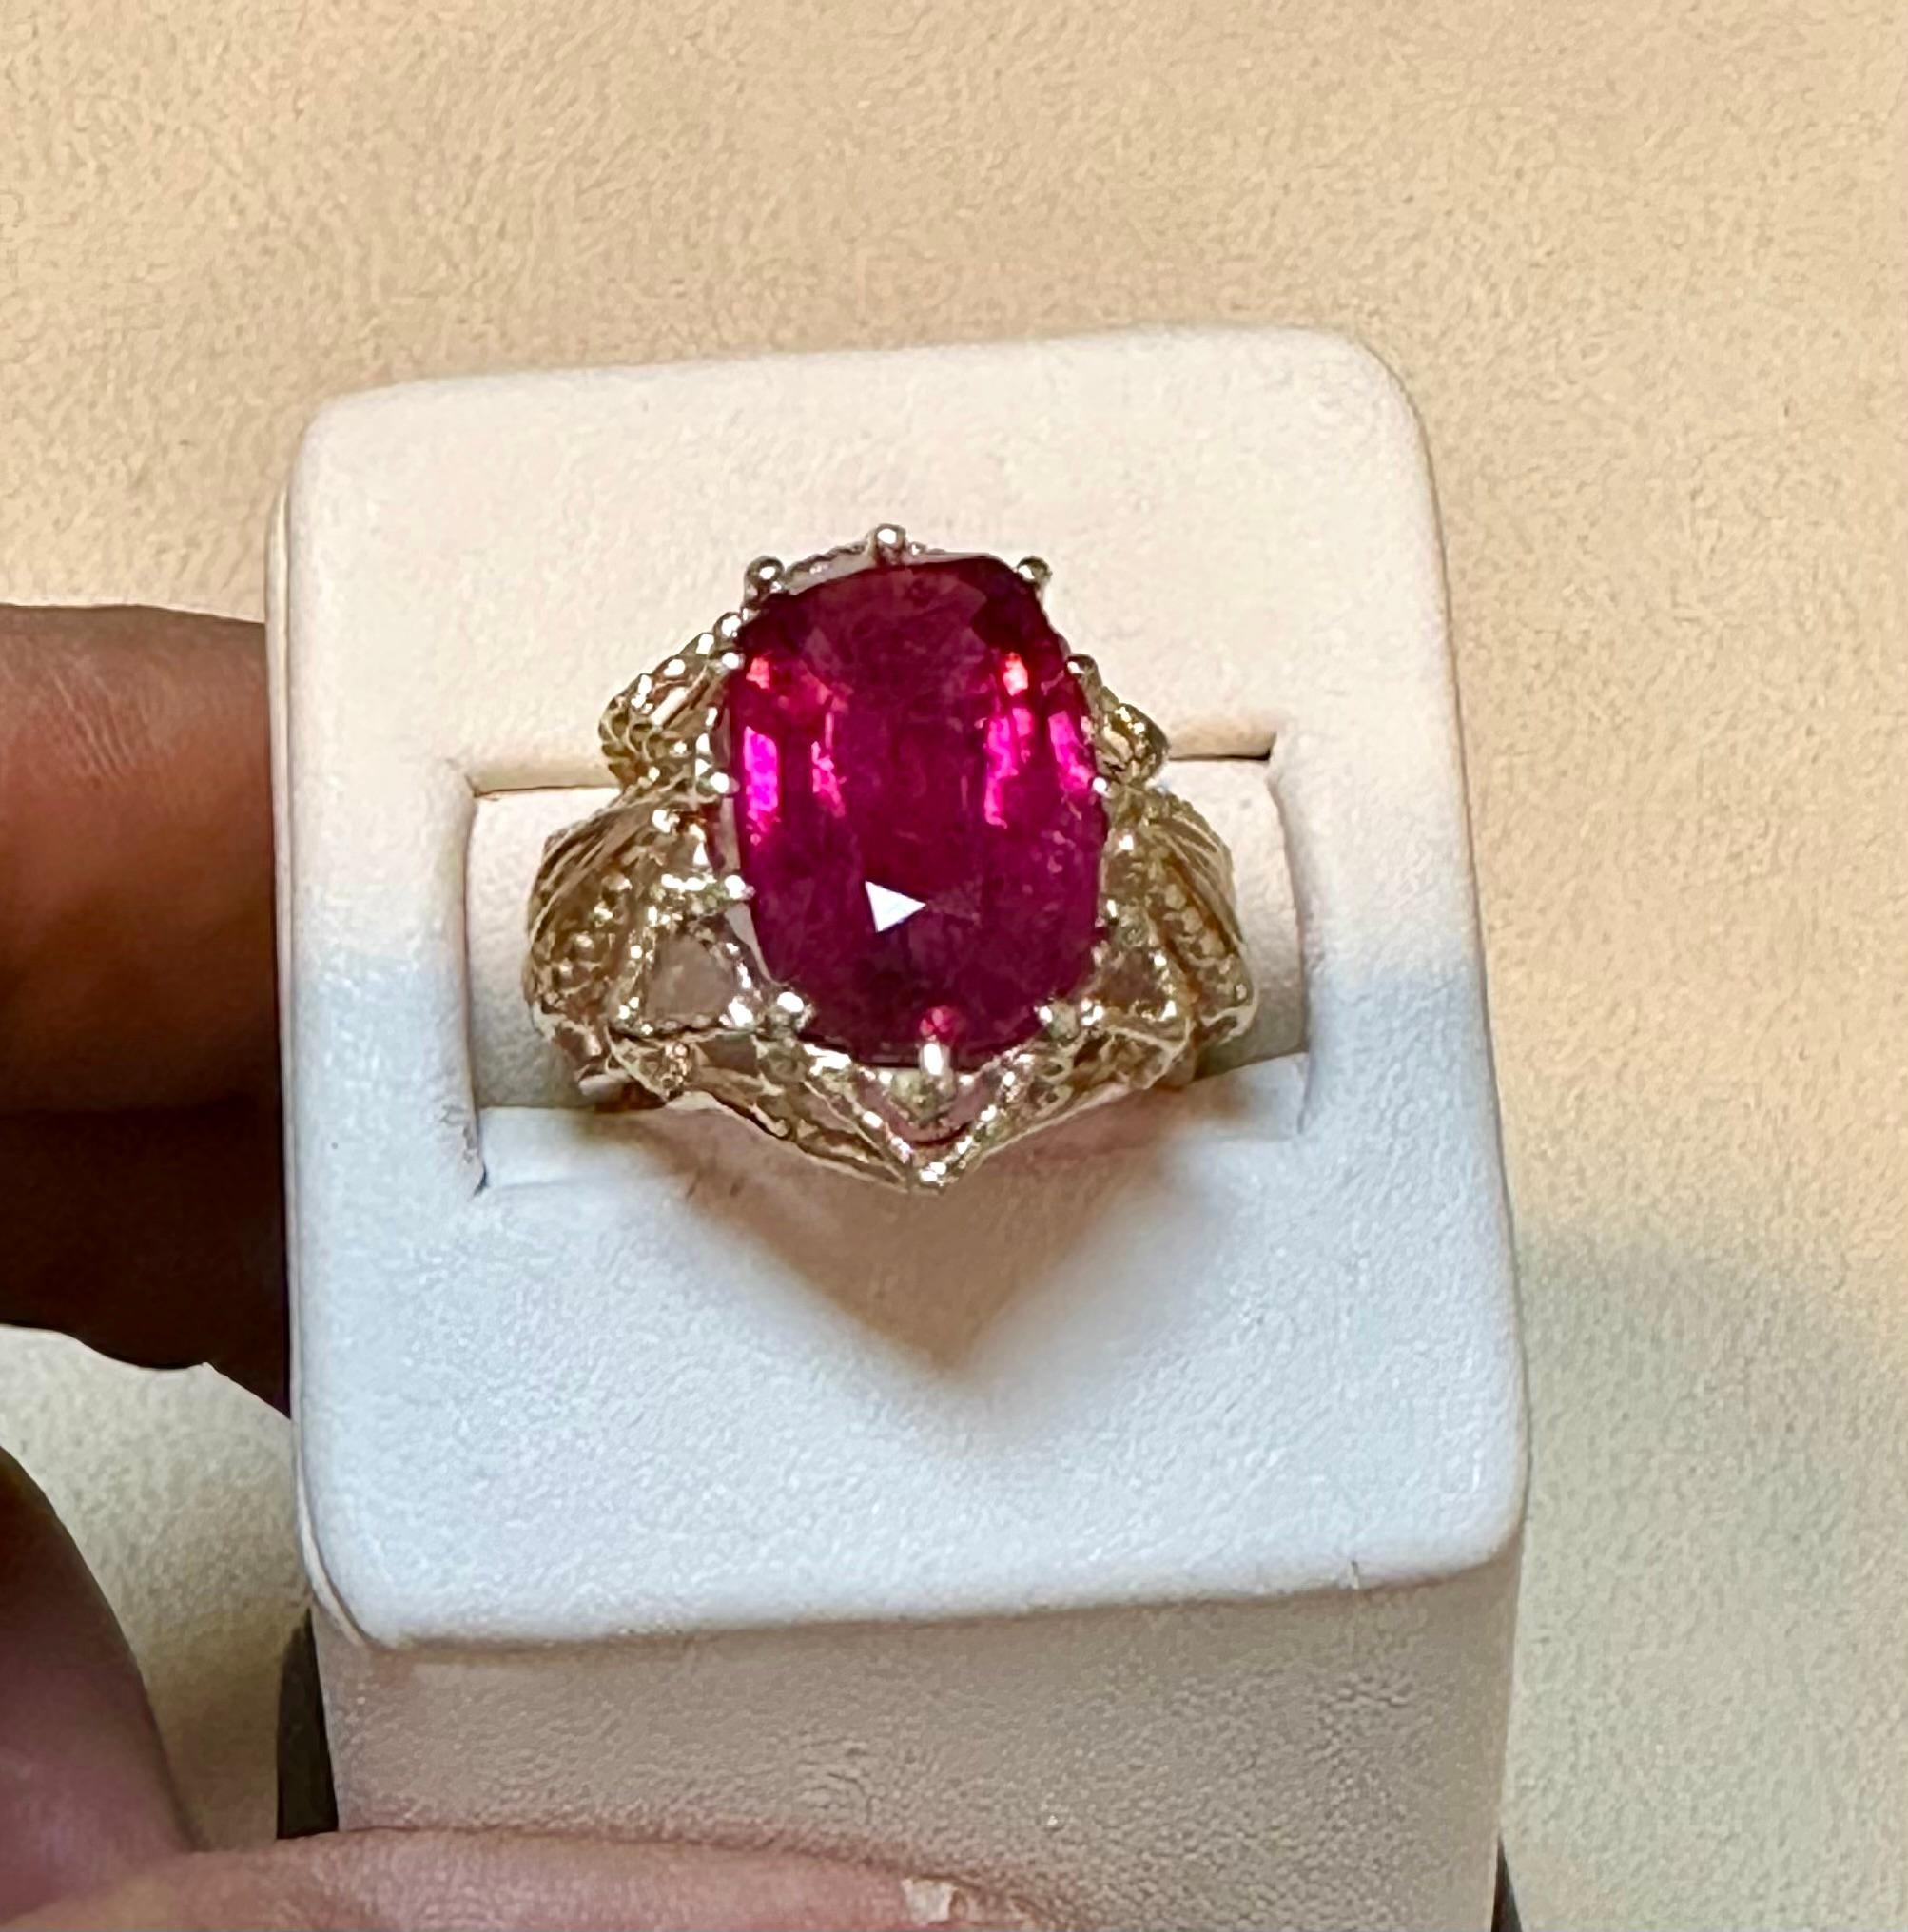 10 Carat Oval Cut Natural Pink Tourmaline 14 Karat Yellow Gold Ring In Excellent Condition For Sale In New York, NY